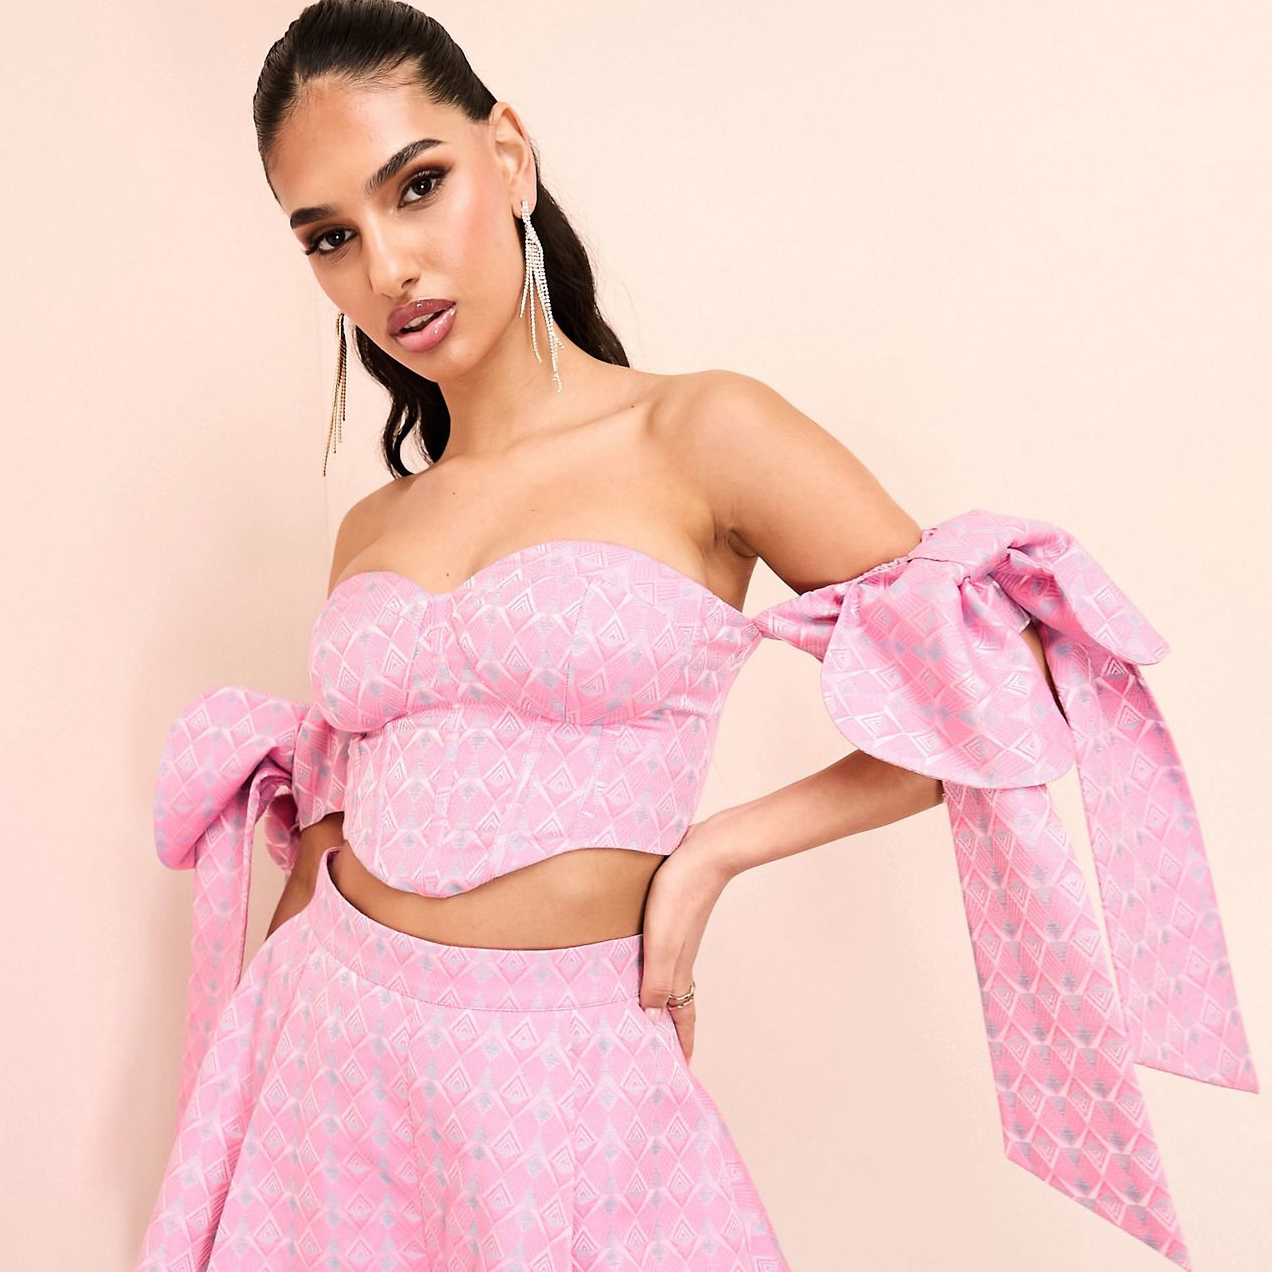 цена Топ Asos Luxe Print Jacquard Co-ord Bandeau Corsetted With Bow Tie Sleeves, розовый